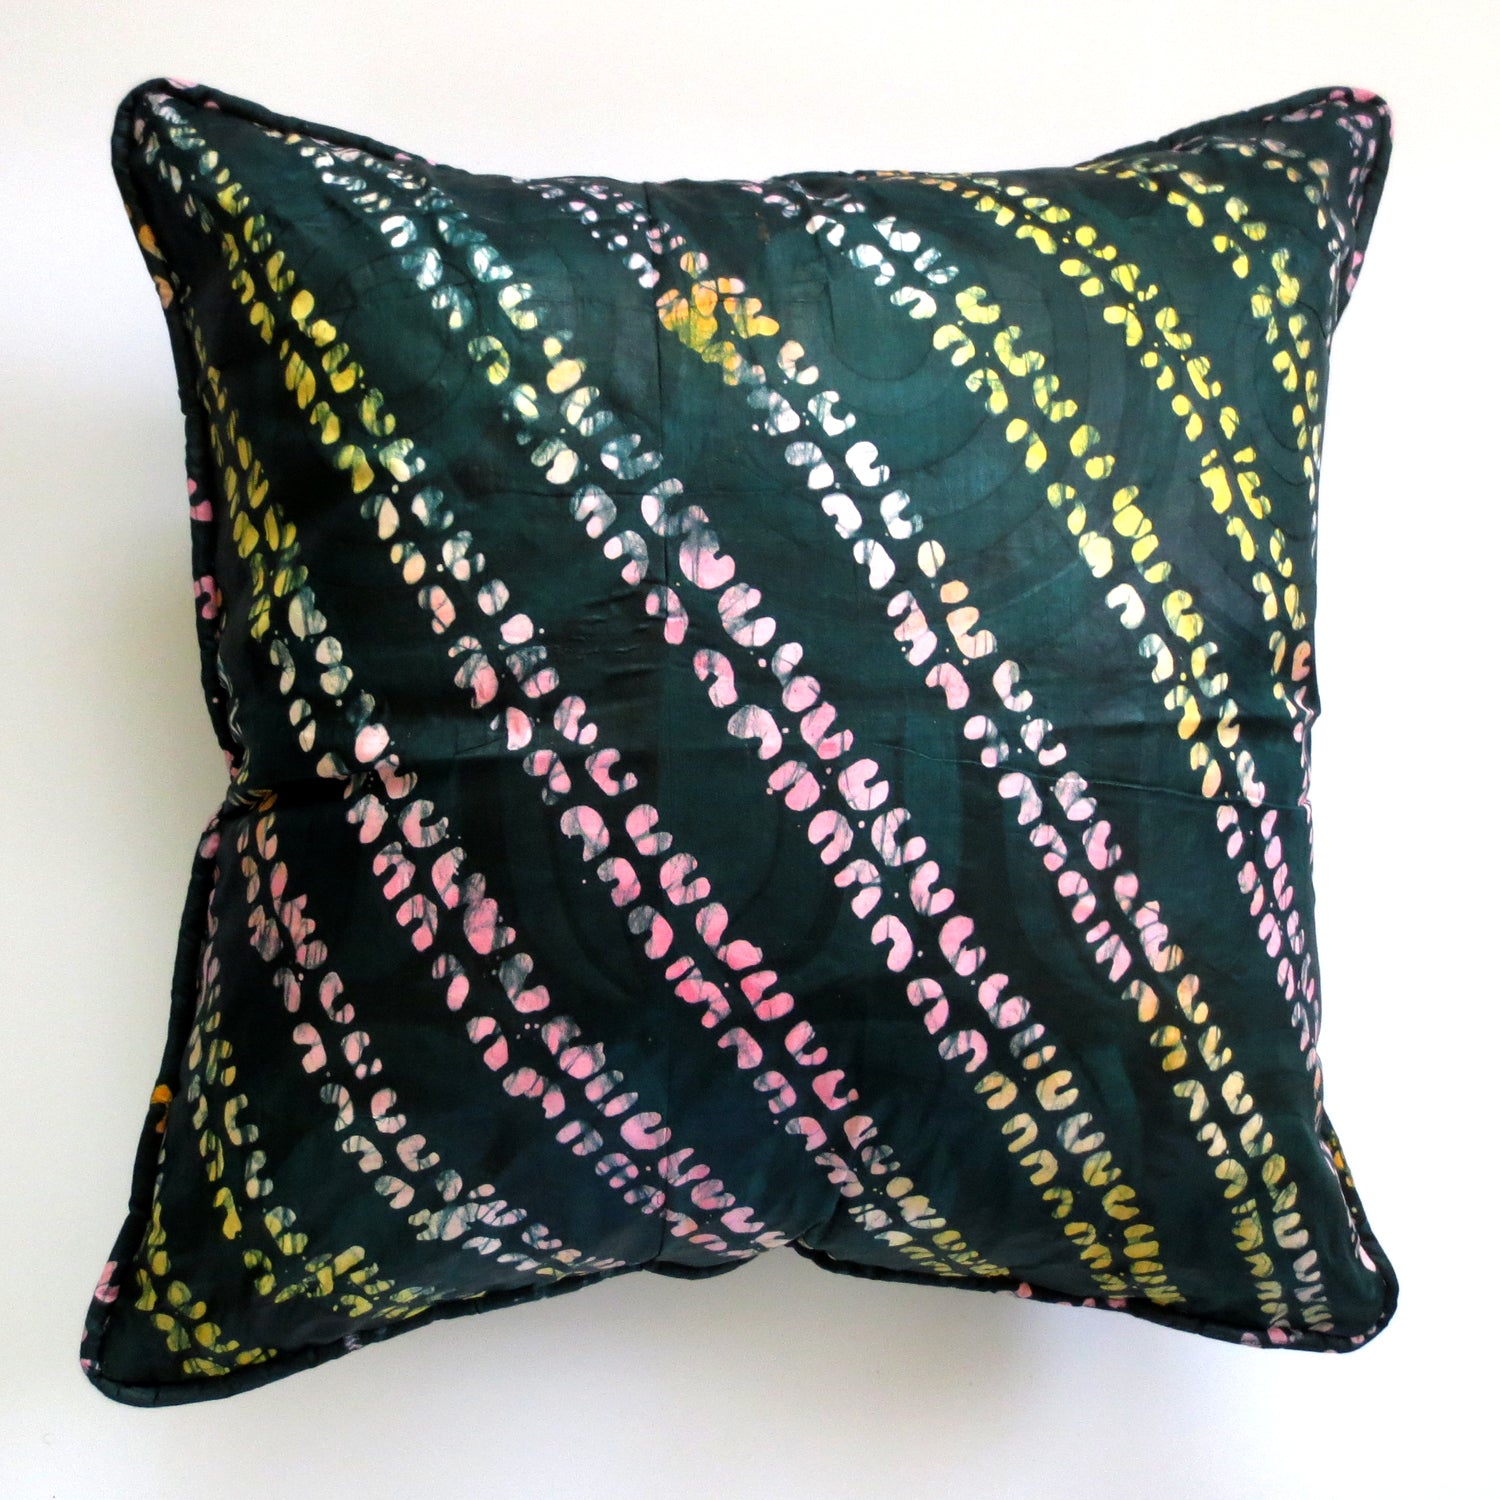 20"x20" pillow cover green pink yellow white